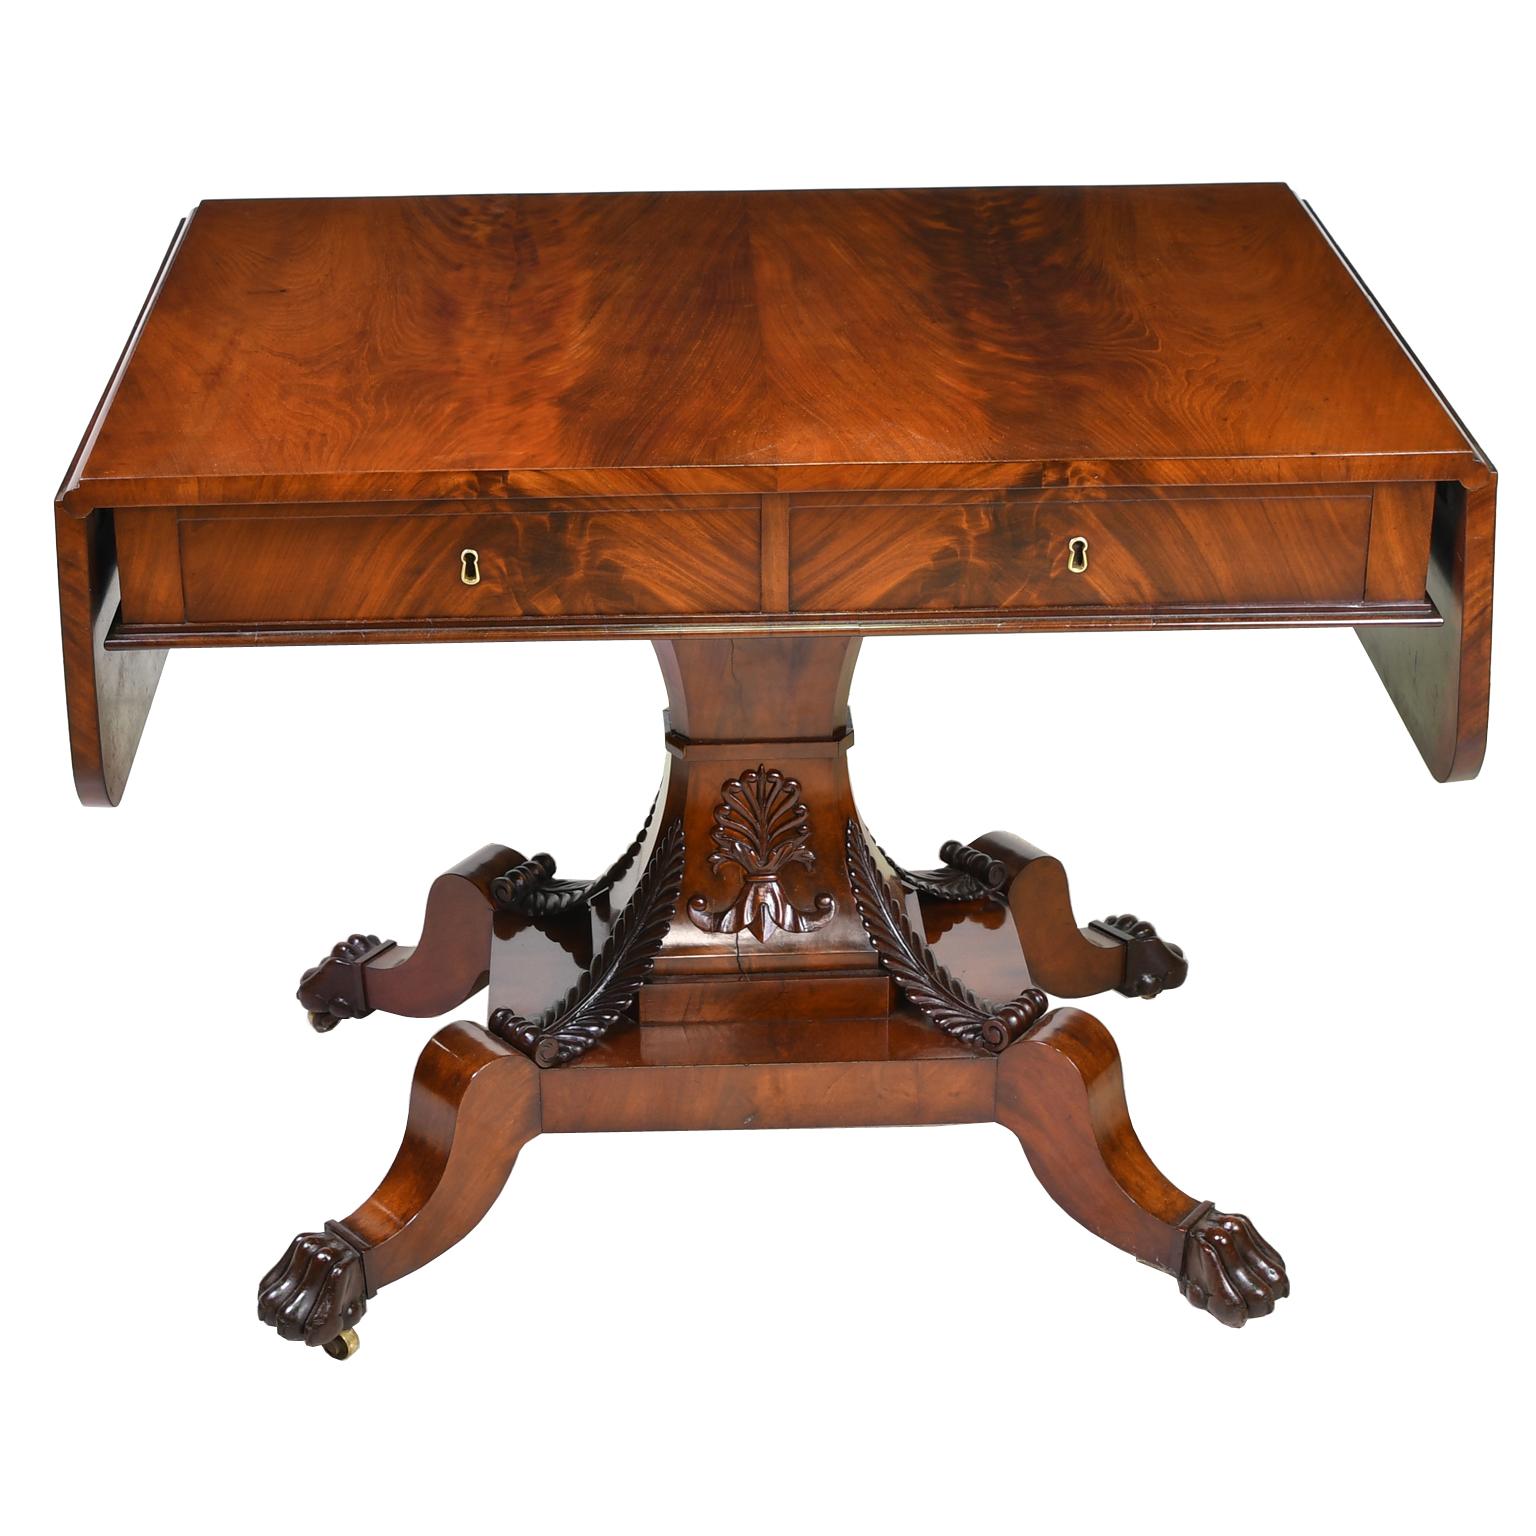 An exceptionally fine Karl Johan salon table, sofa table or desk in beautiful West Indies mahogany. The top has two leaves that drop down on each side with two drawers along the apron, and is supported by a center pedestal composed of a concave